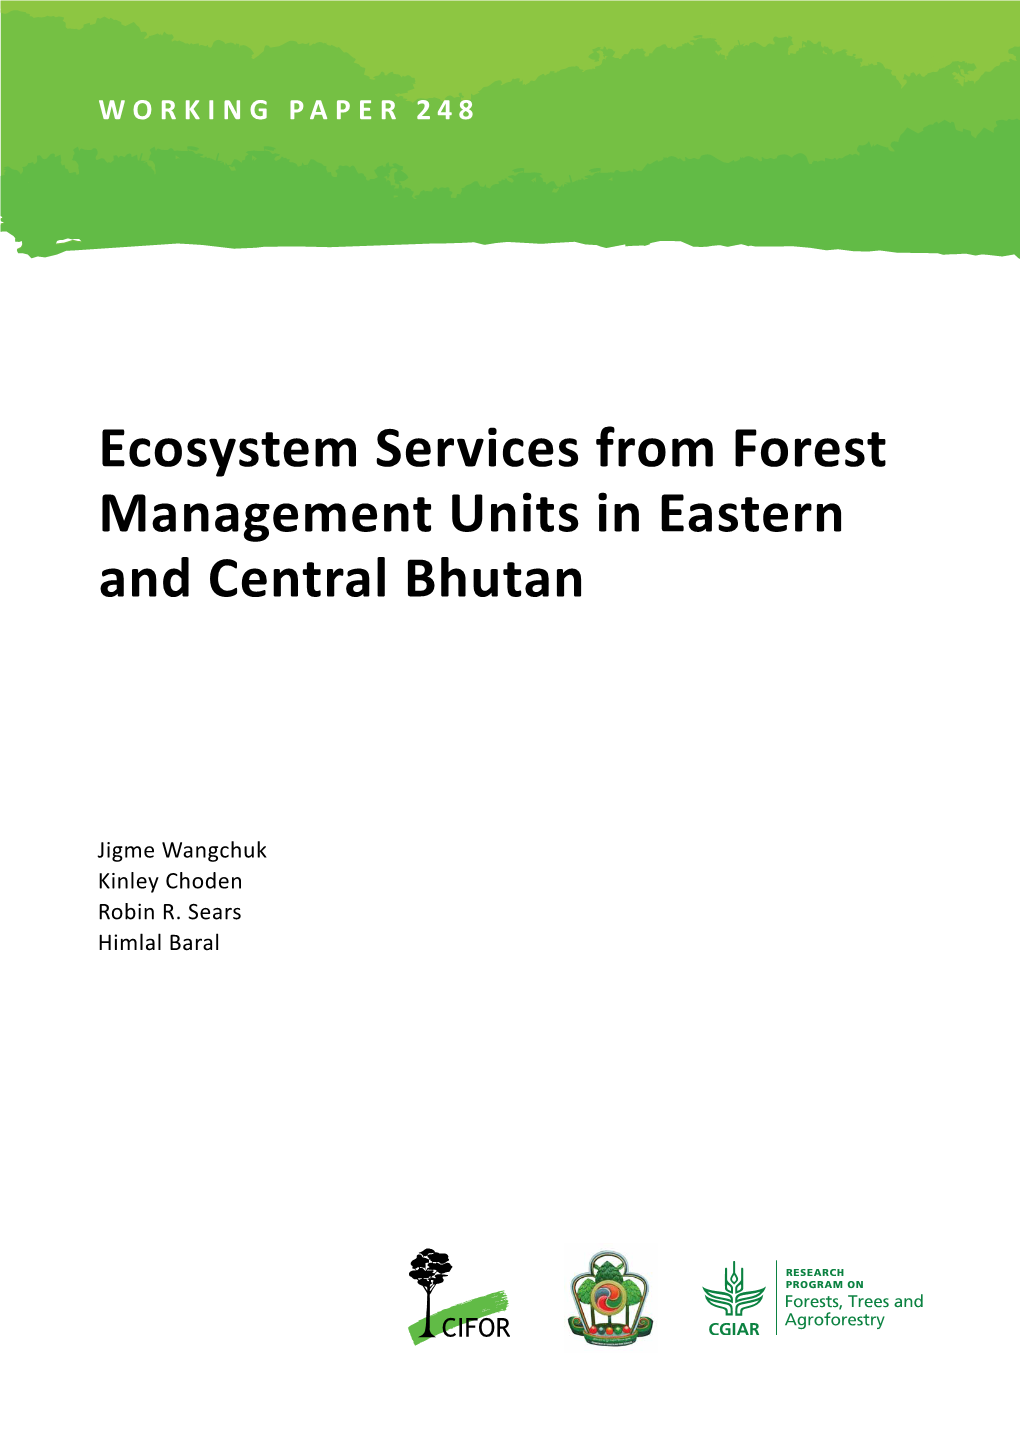 Ecosystem Services from Forest Management Units in Eastern and Central Bhutan